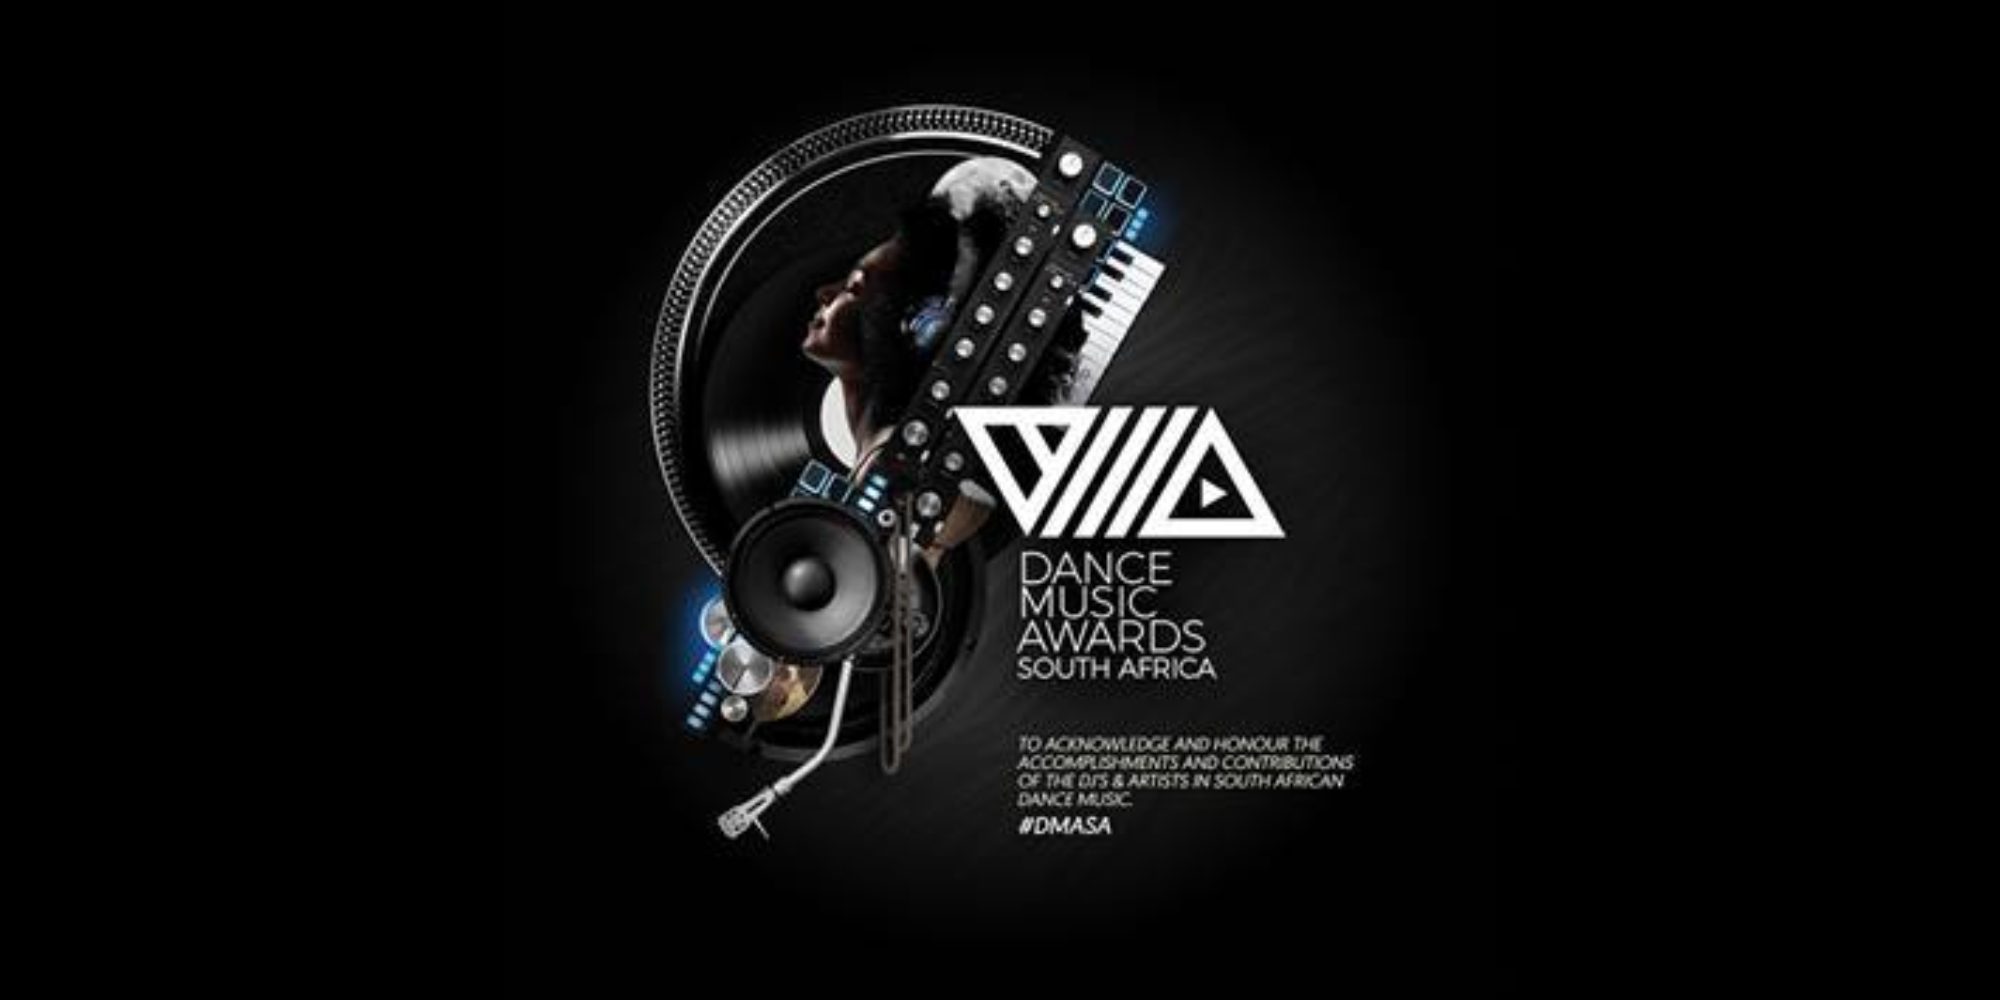 Dance Music Awards South Africa”